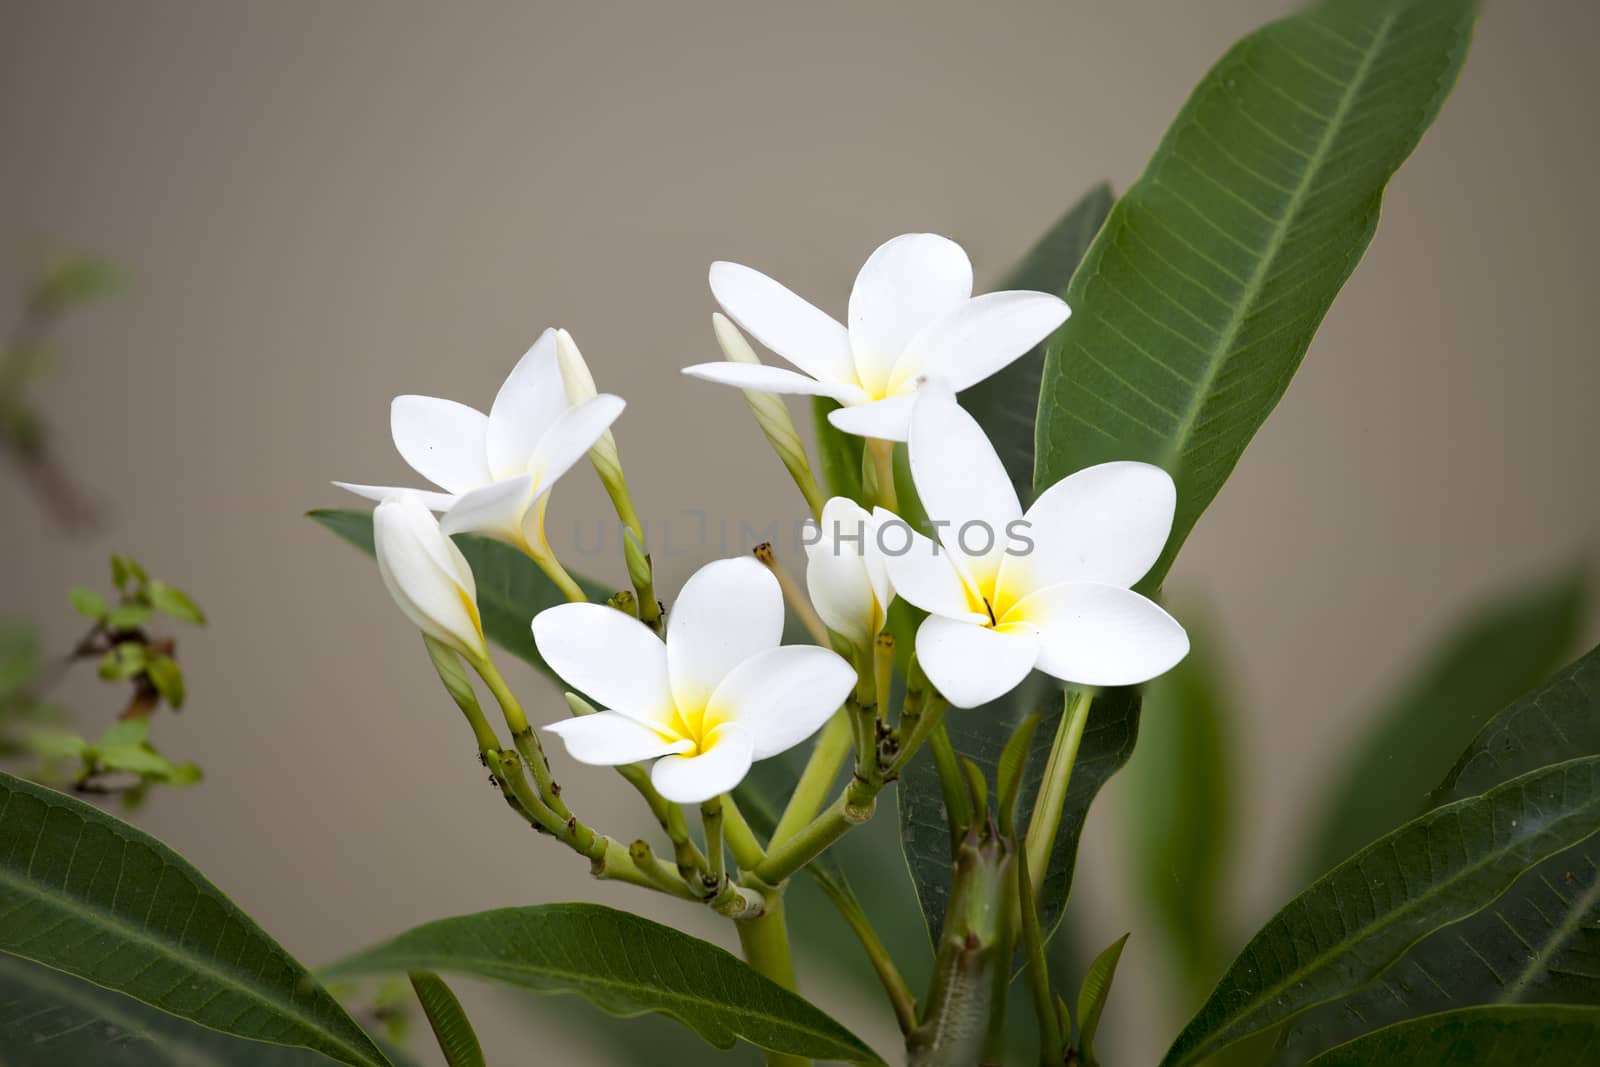 White frangipani flowers on blanch and blurry background